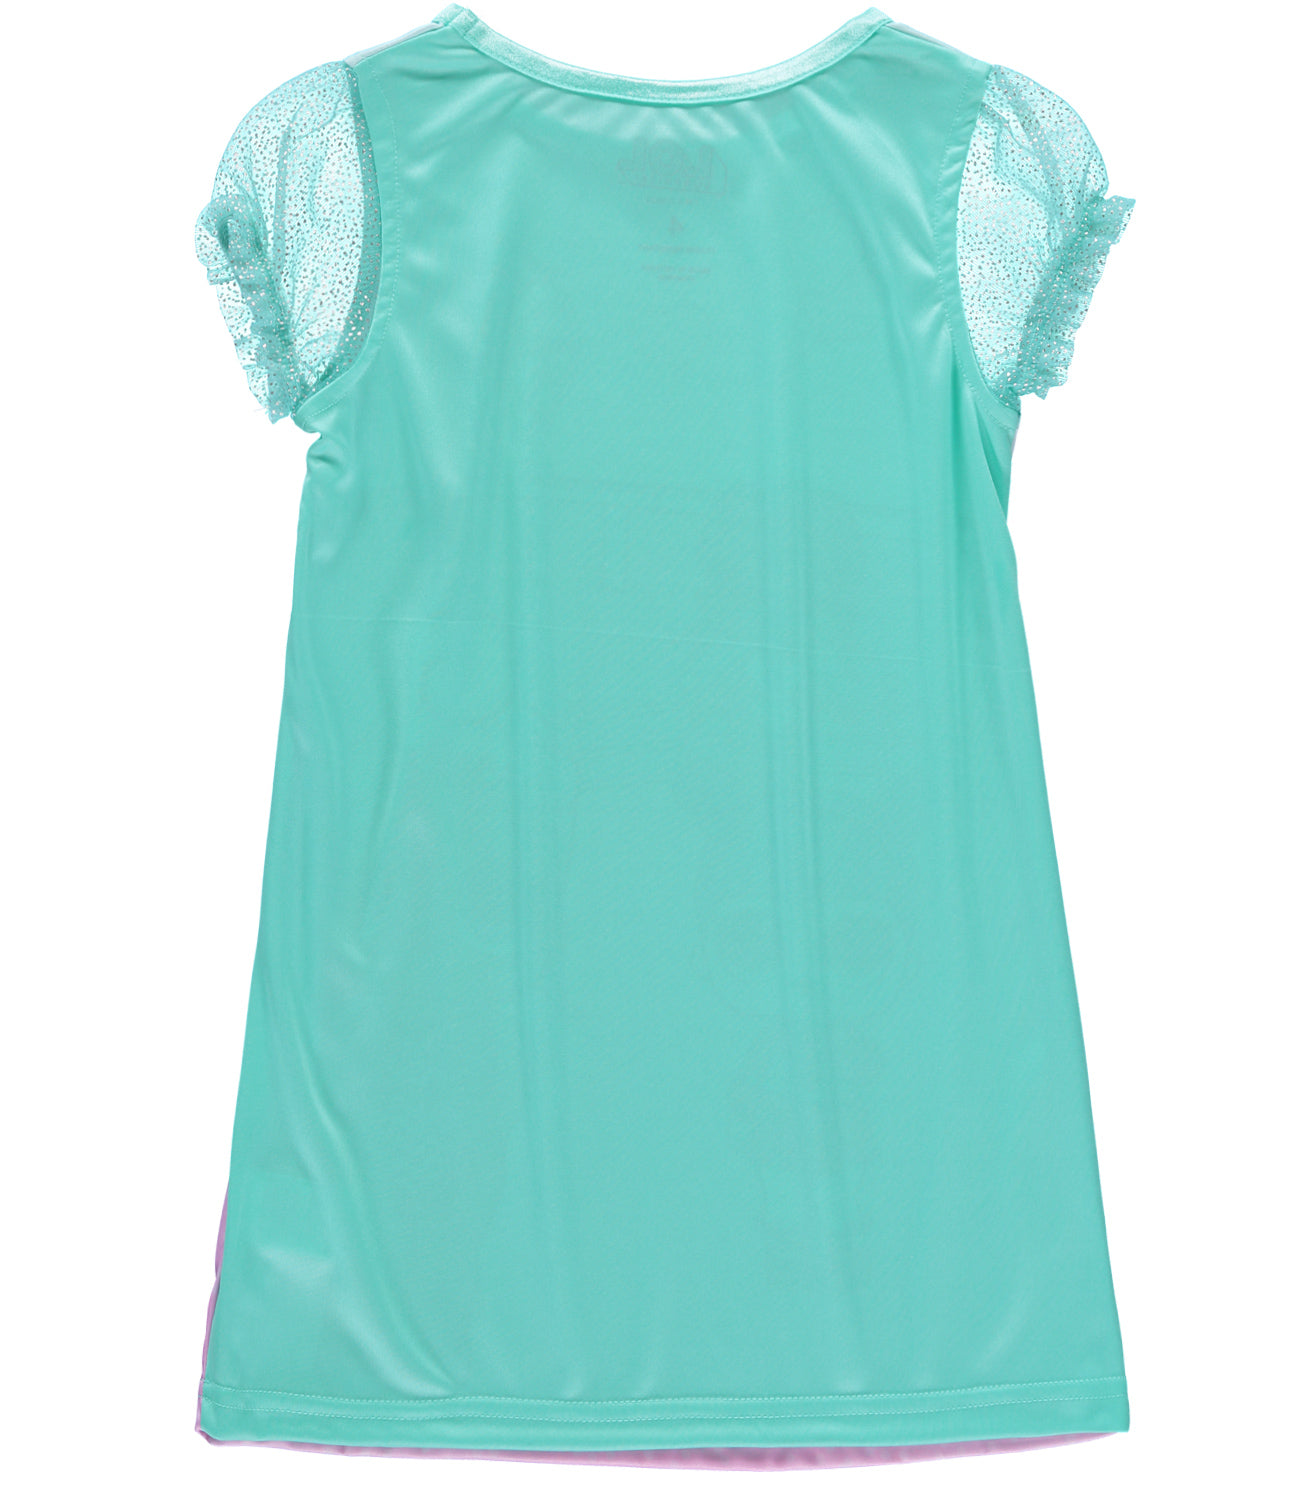 L.O.L. Surprise! Girls 4-10 Short Sleeve Nightgown